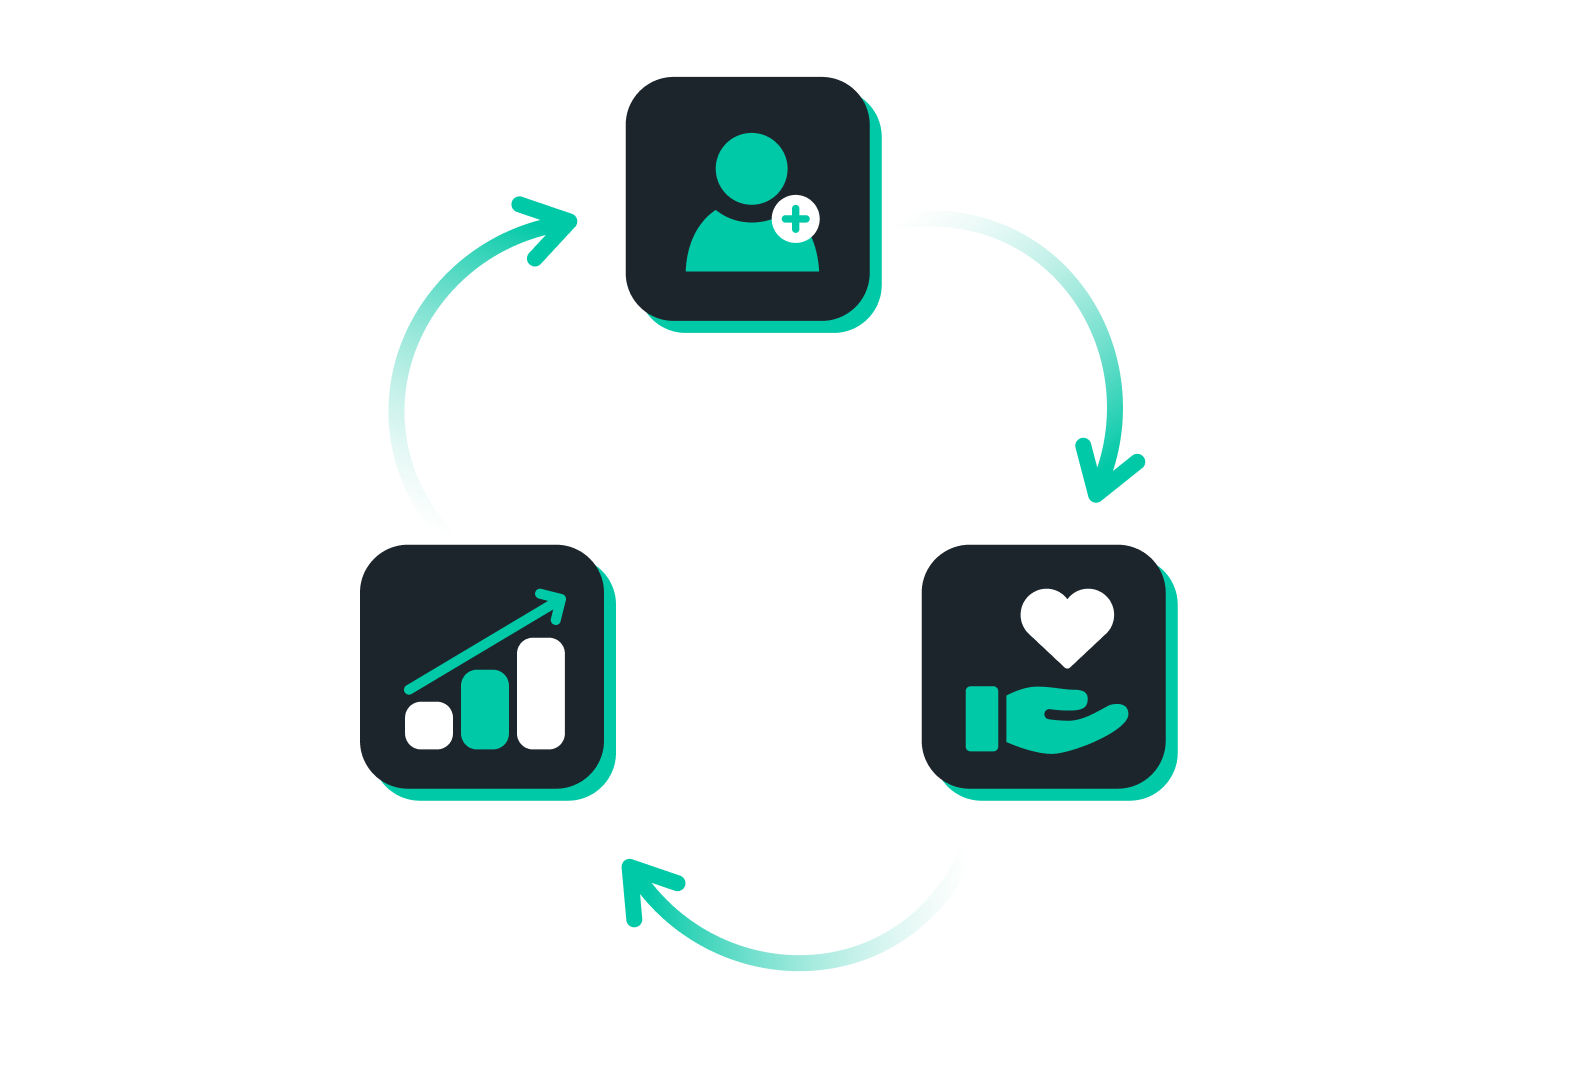 Fintech bank partnerships growing together as shown in three black, green icons with arrows in cycle